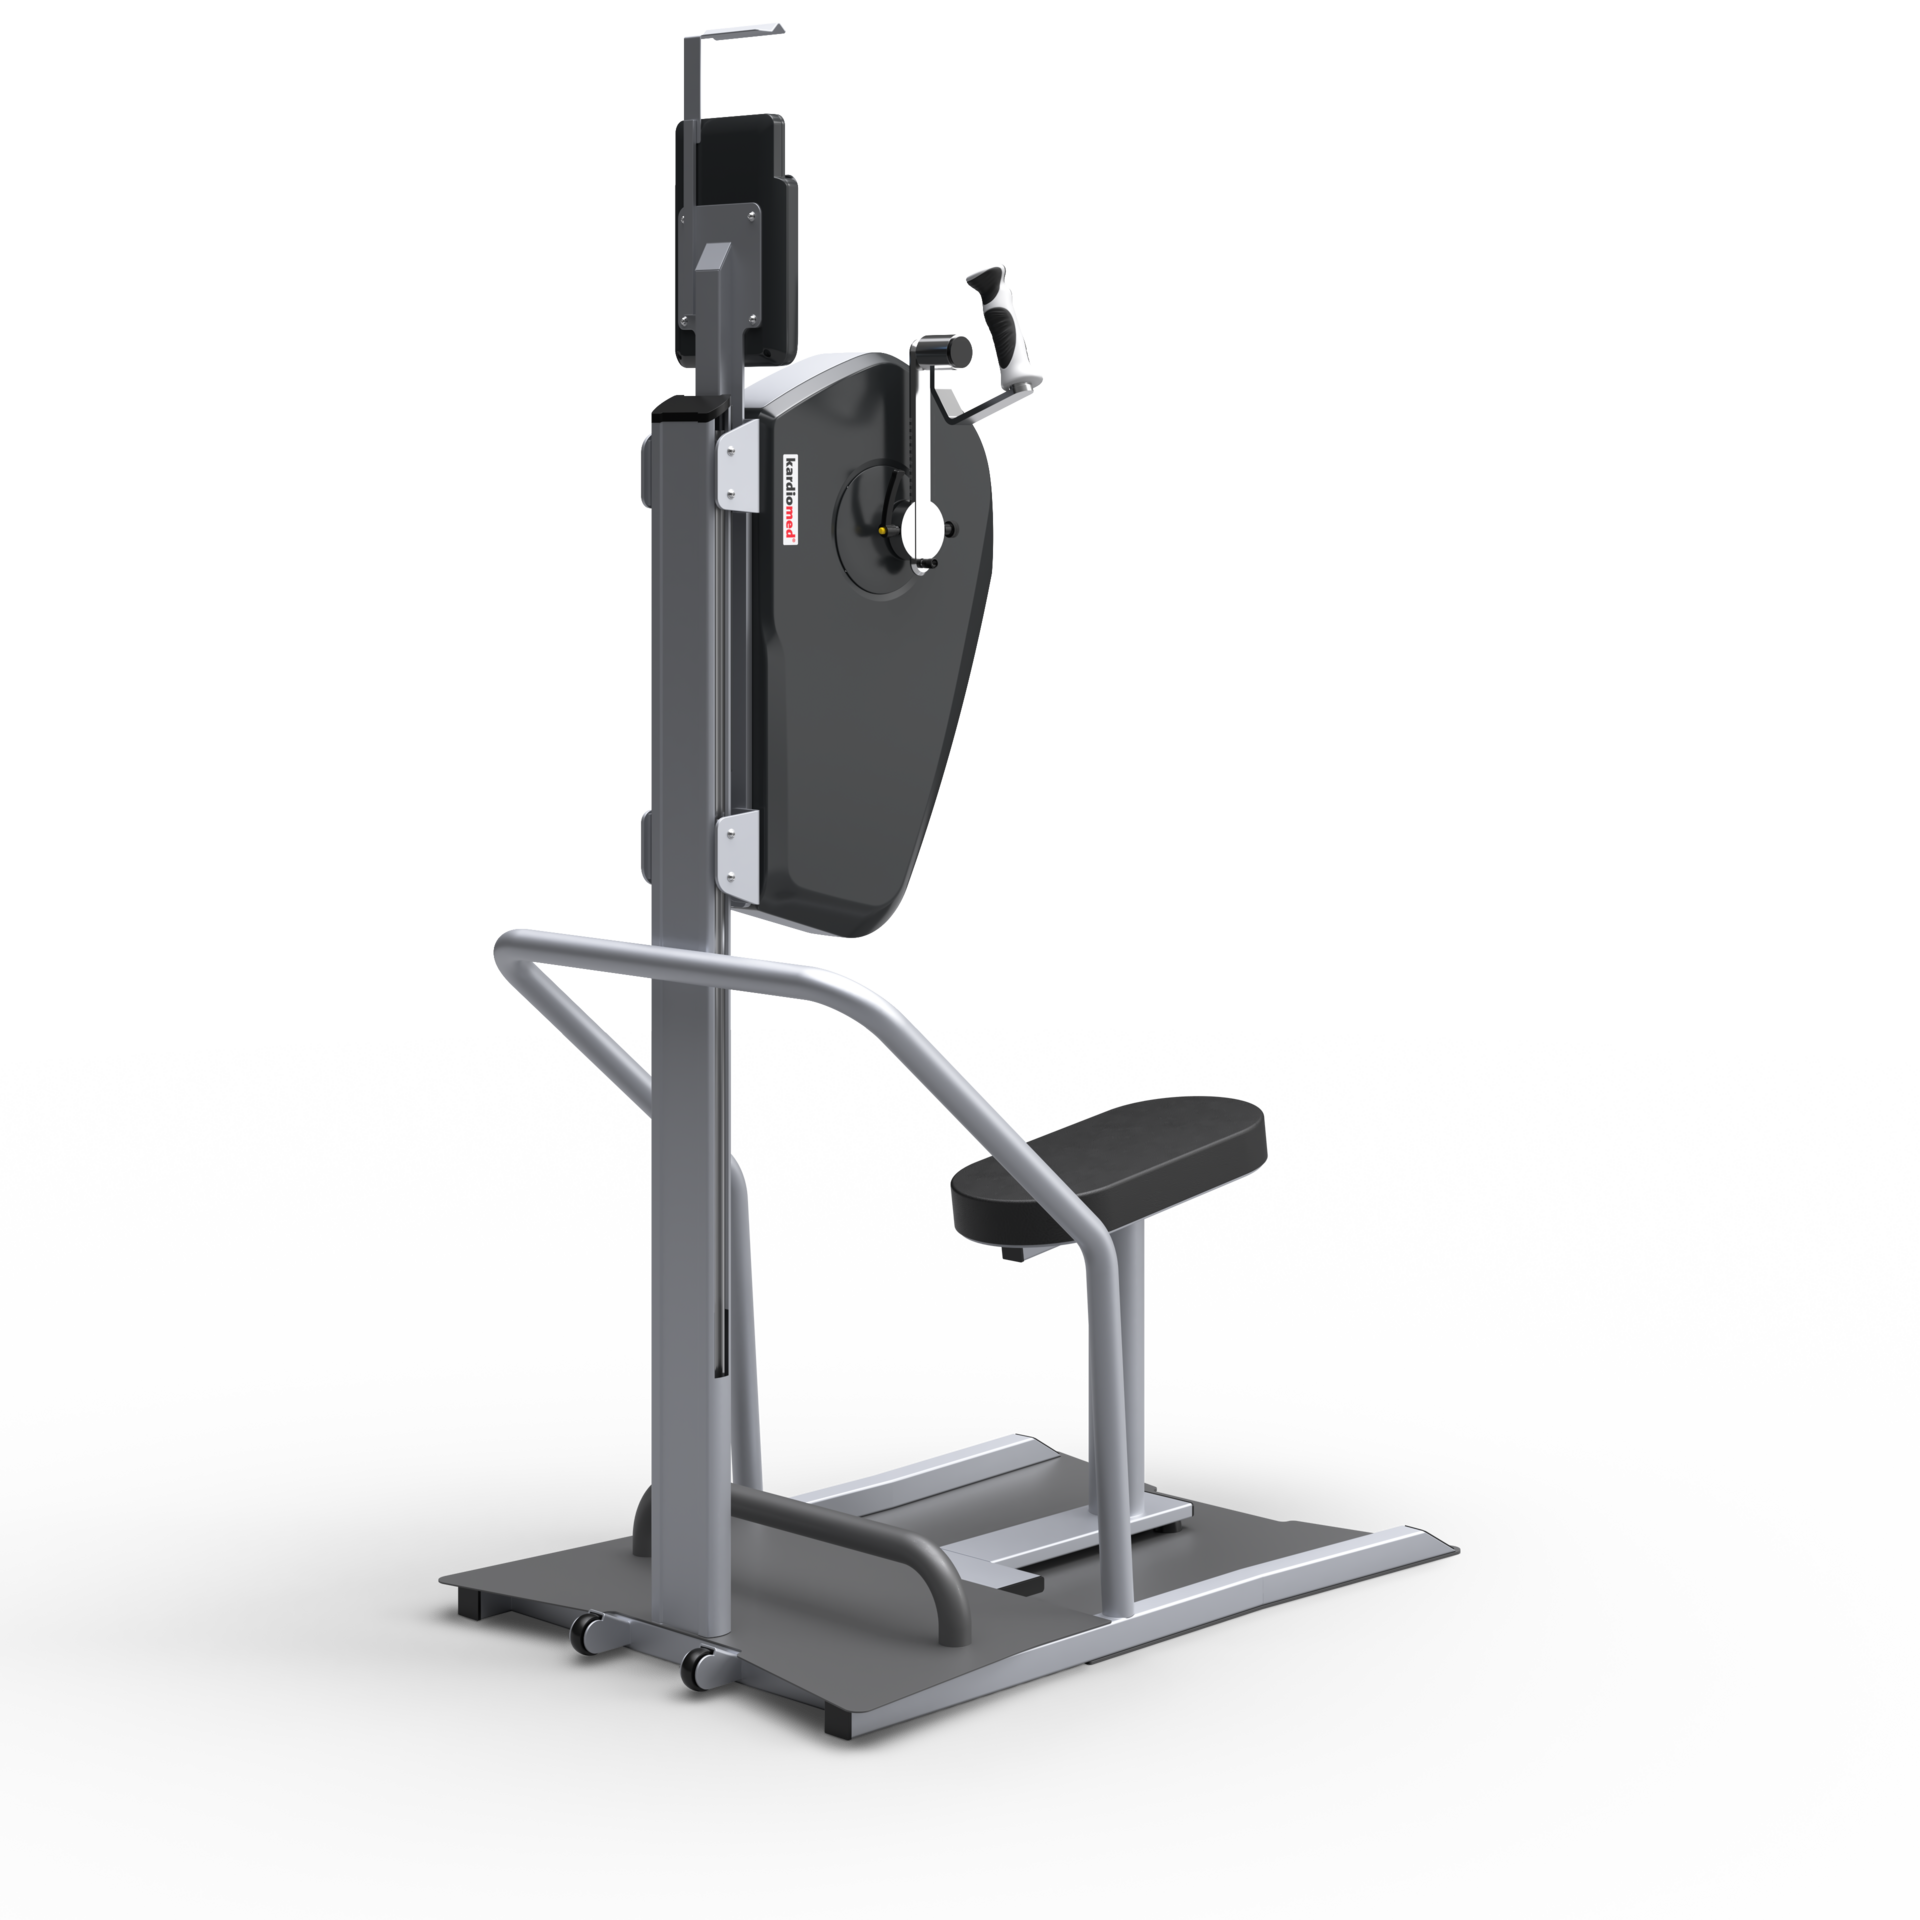 kardiomed 540 upper body cycle | proxomed